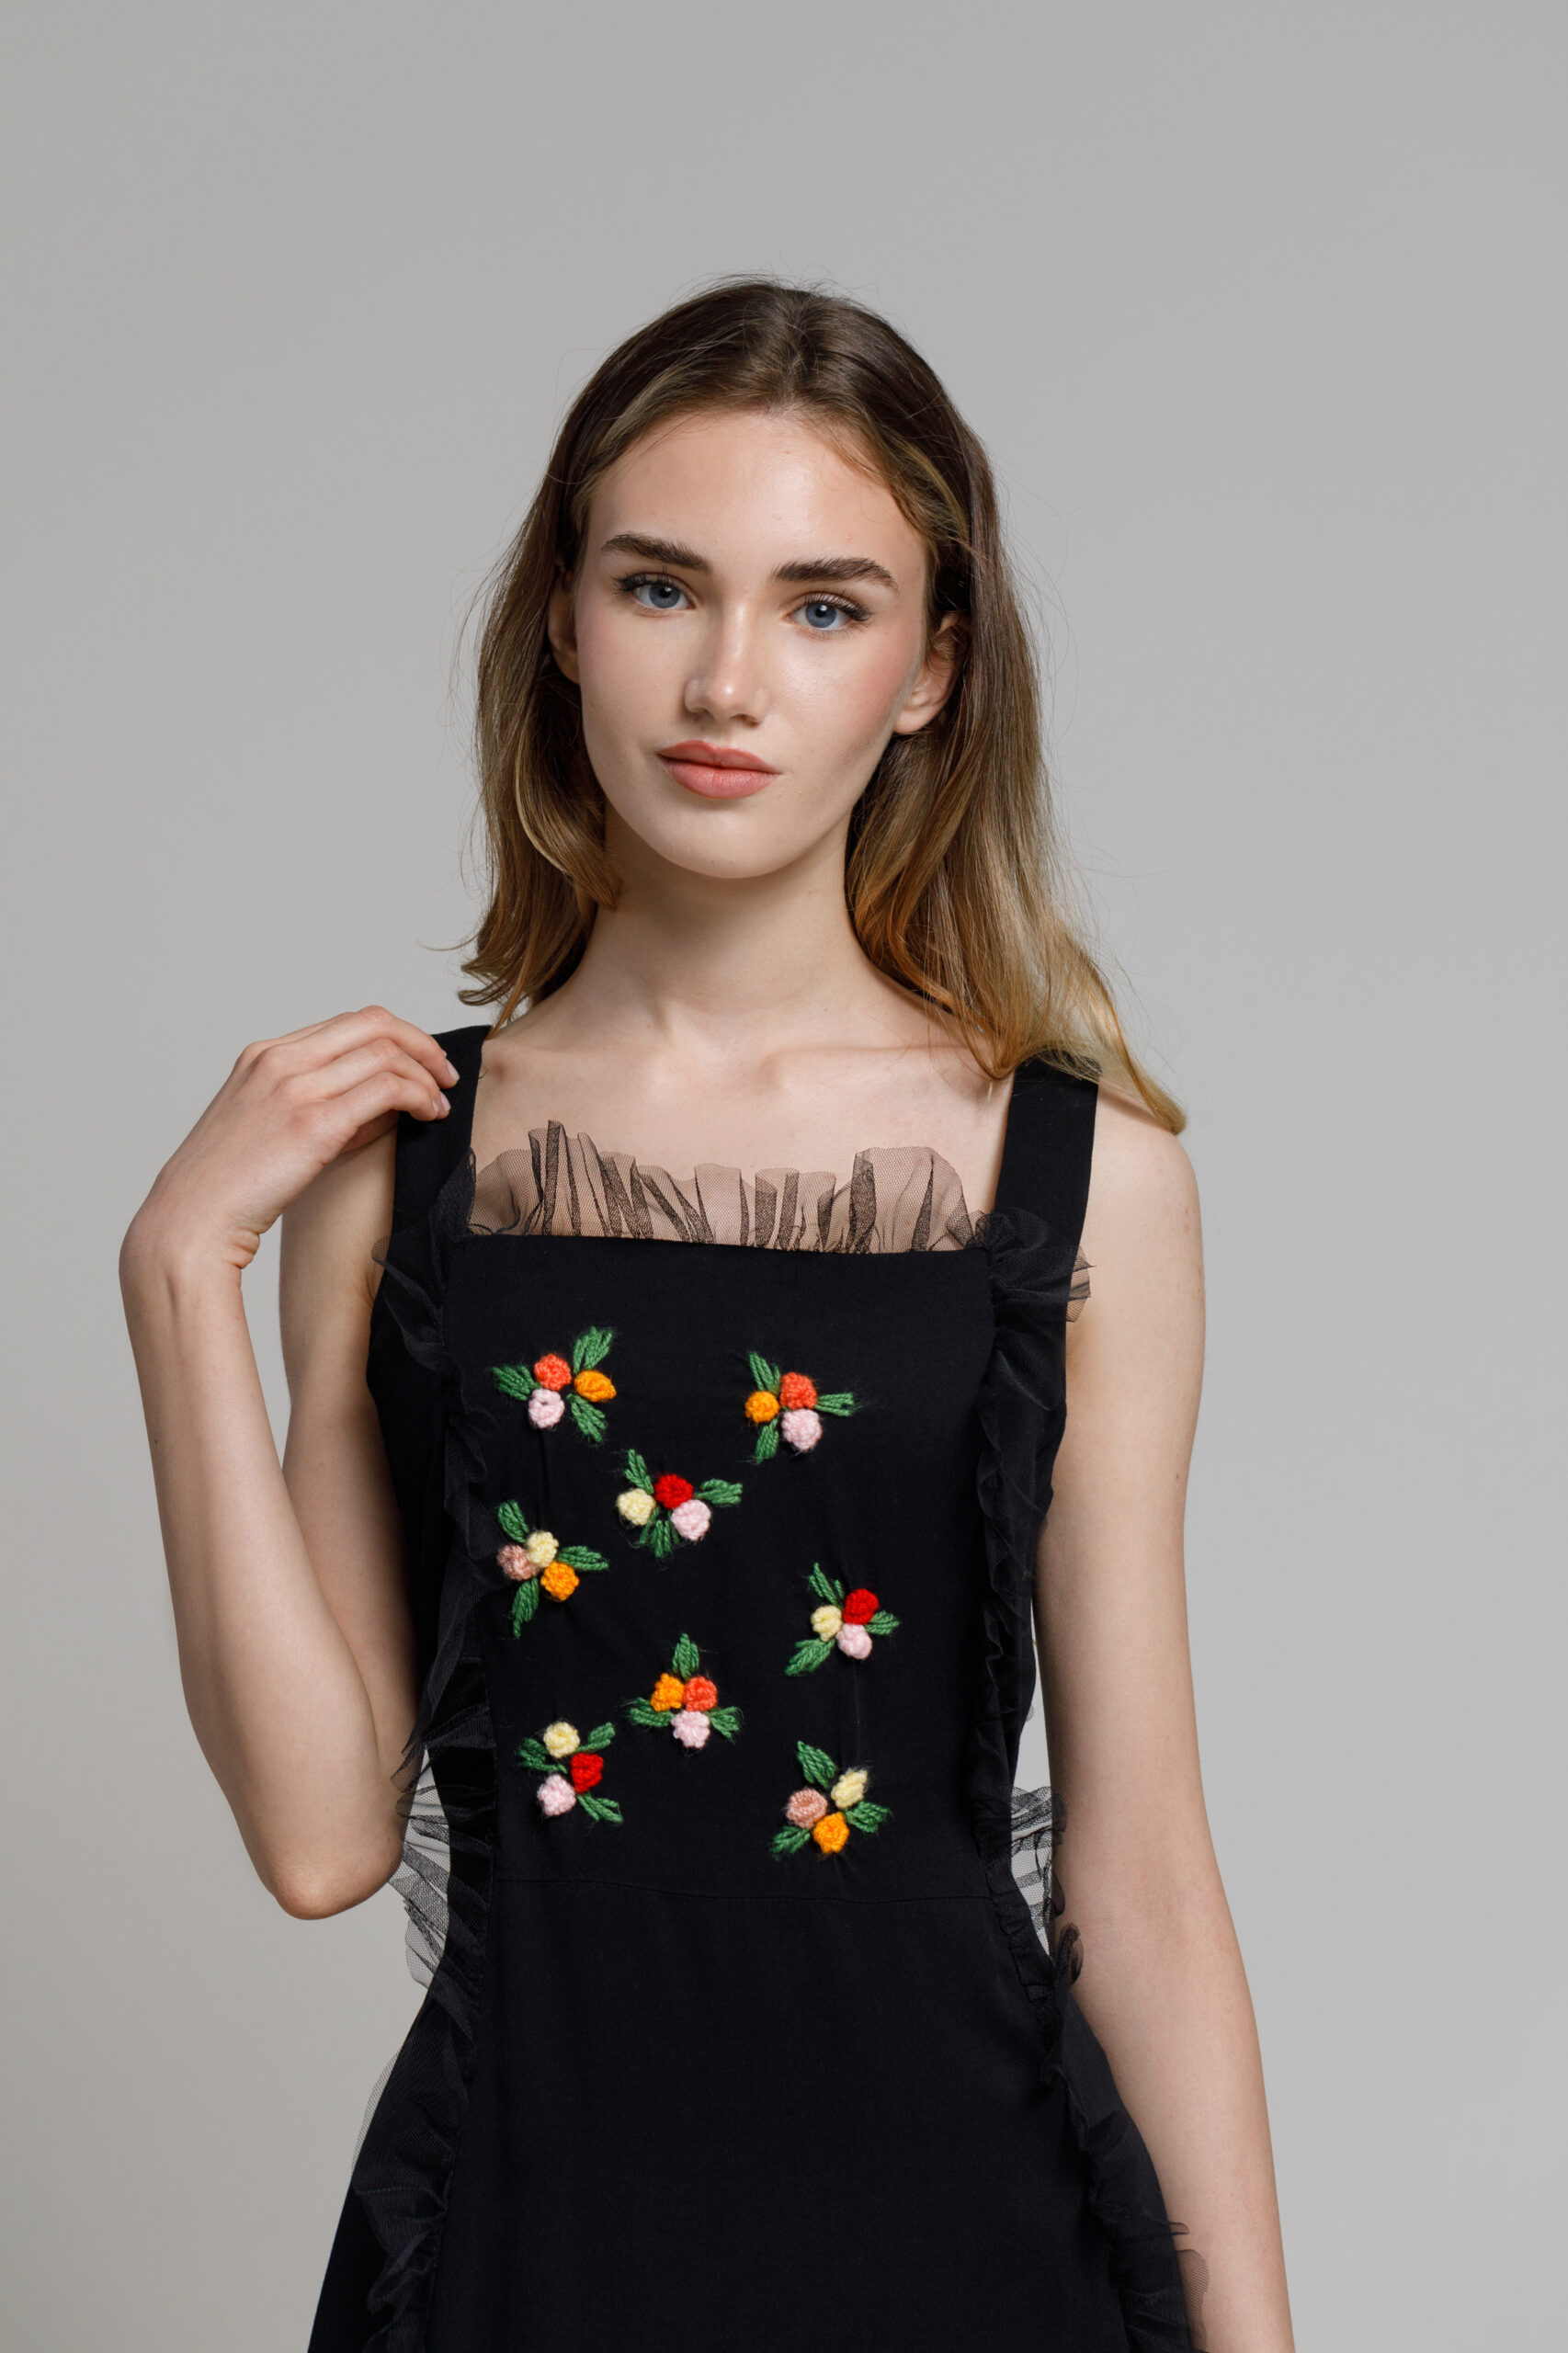 EDINA black dress with tulle frill and embroidery. Natural fabrics, original design, handmade embroidery